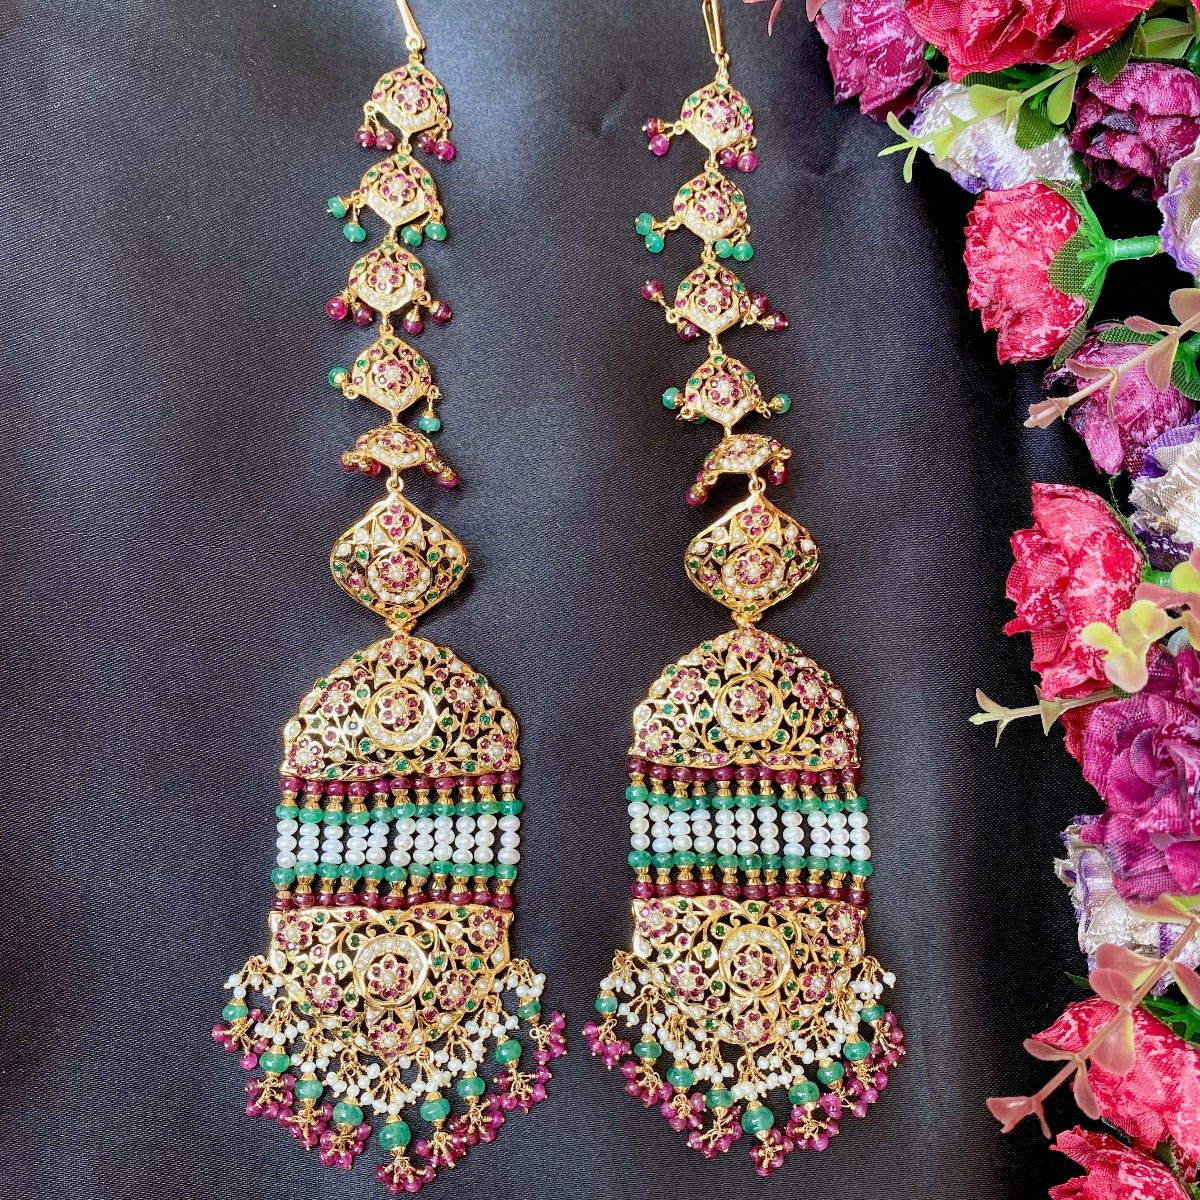 jhommer earrings in 22k gold studded with pearls rubies and emeralds